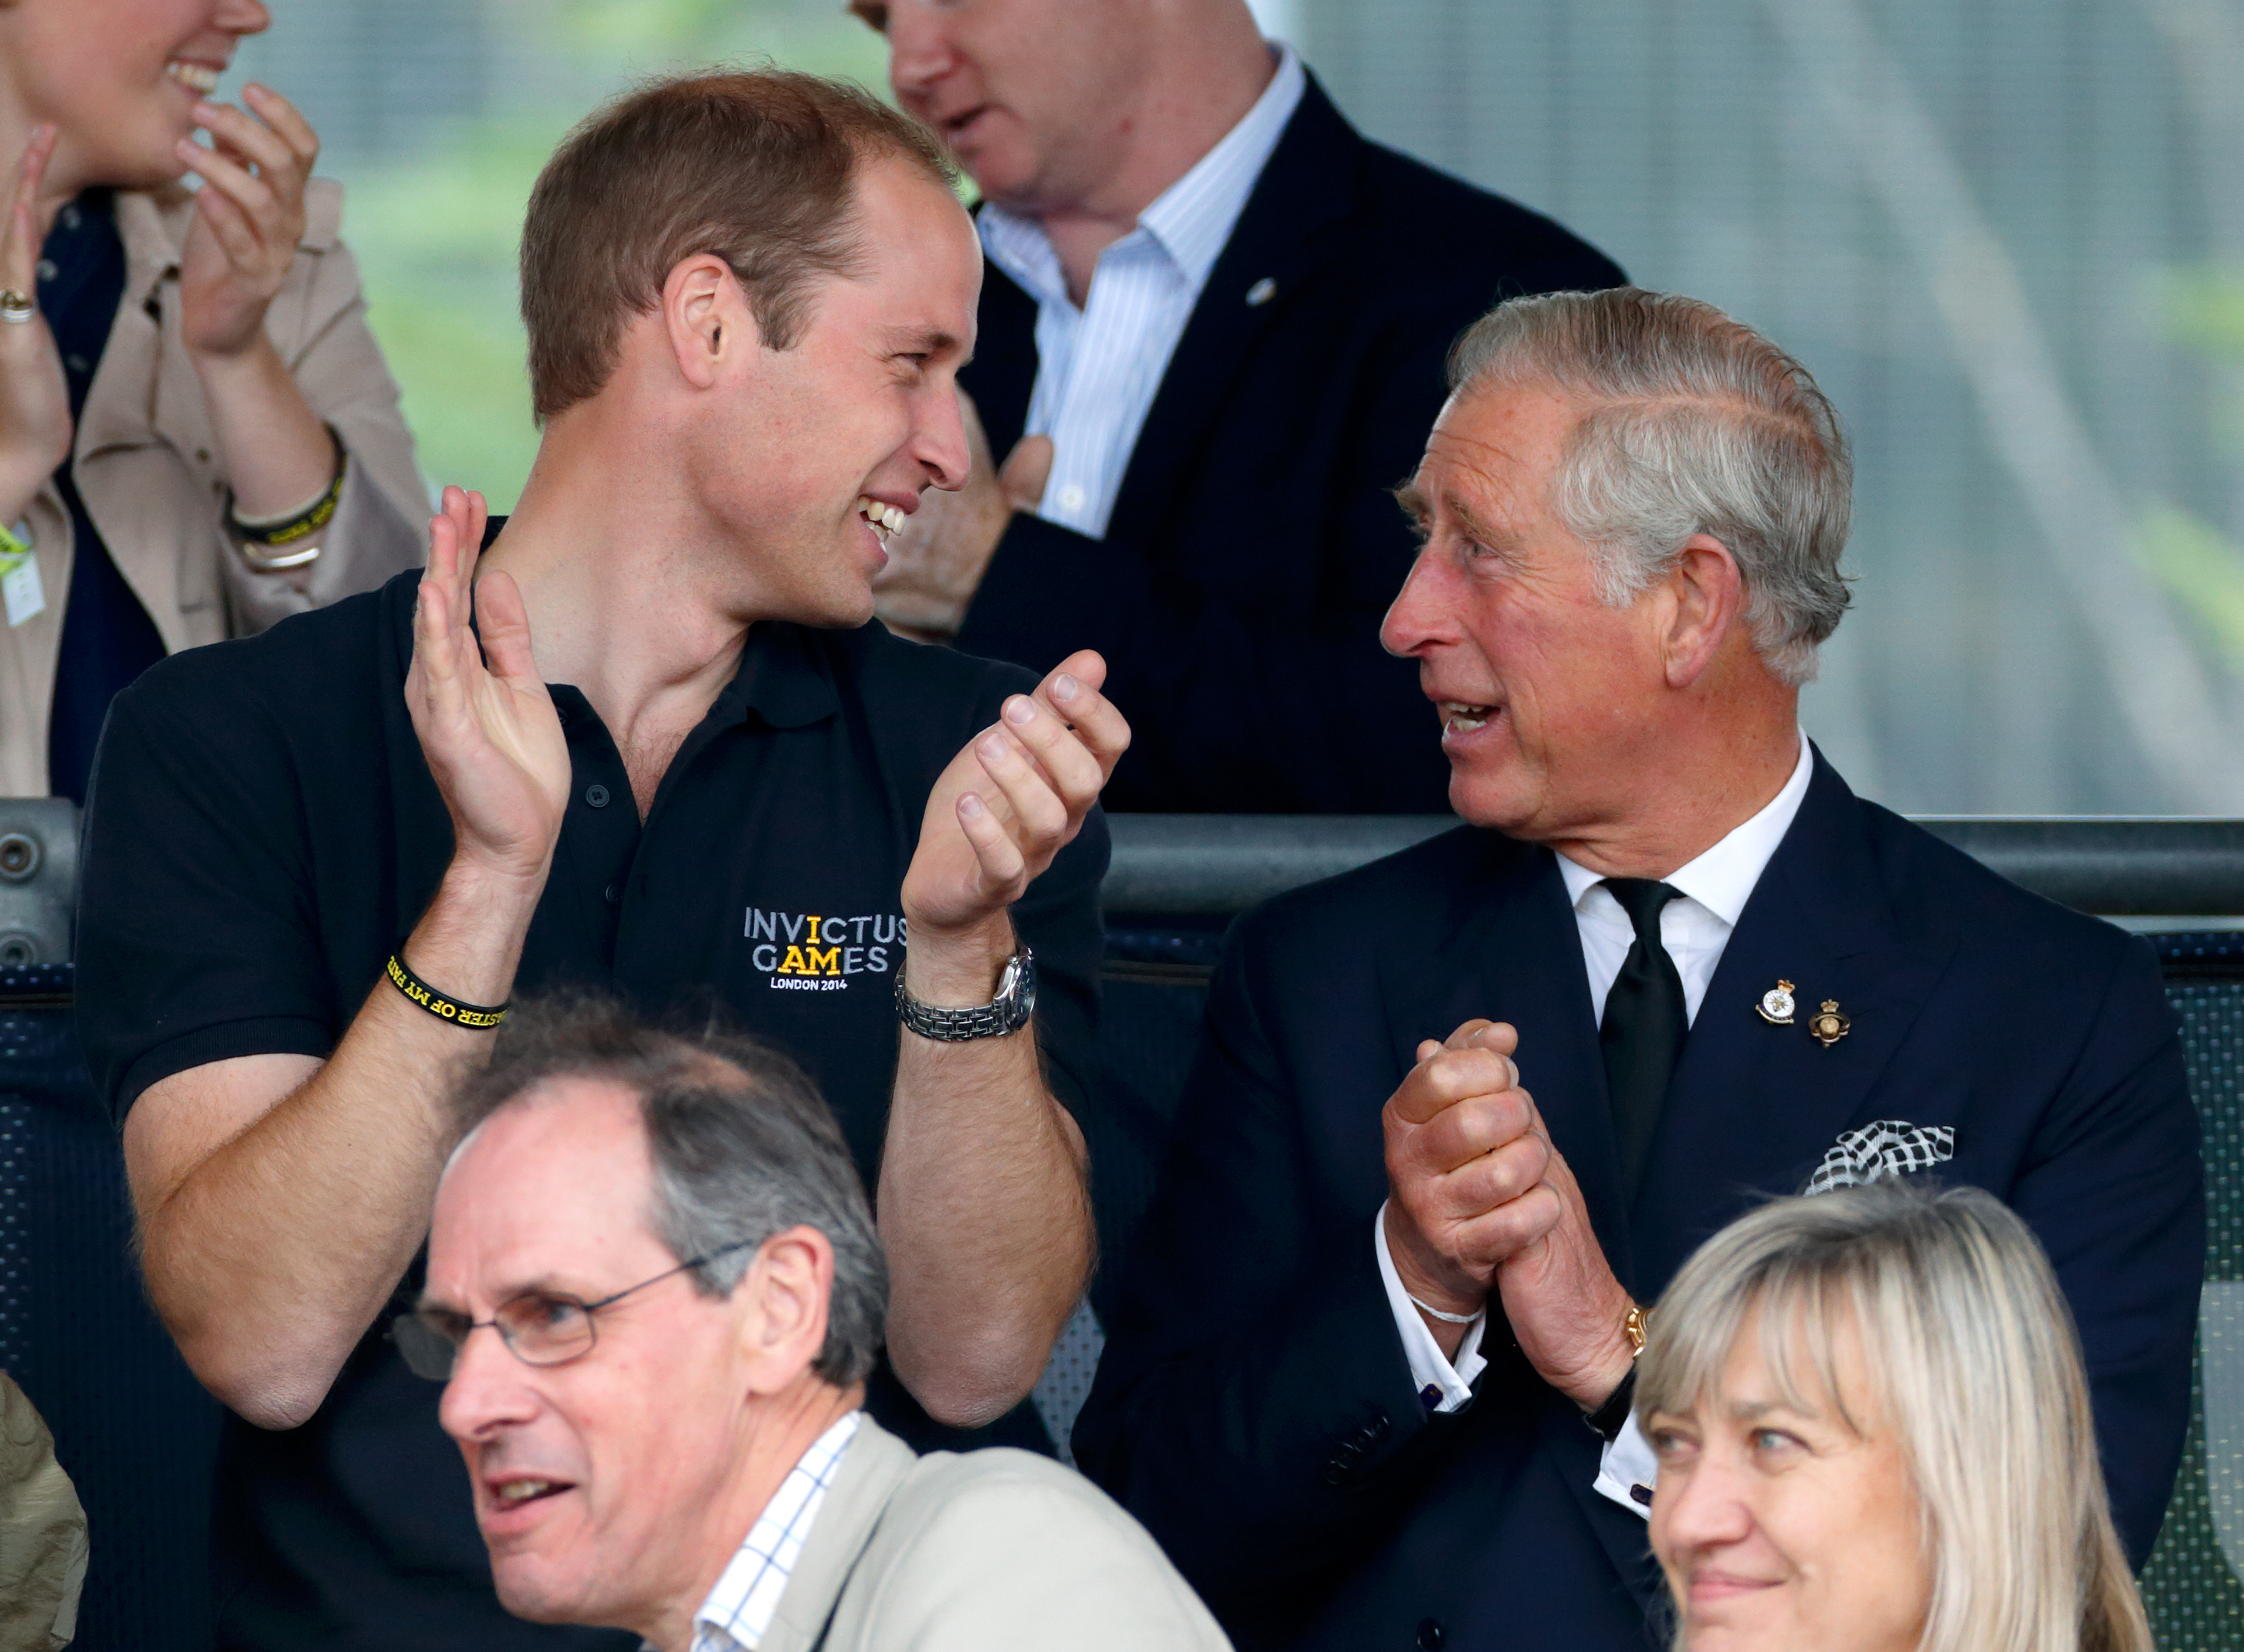 Prince William and King Charles III at the Invictus Games in London, England on September 11, 2014 | Source: Getty Images